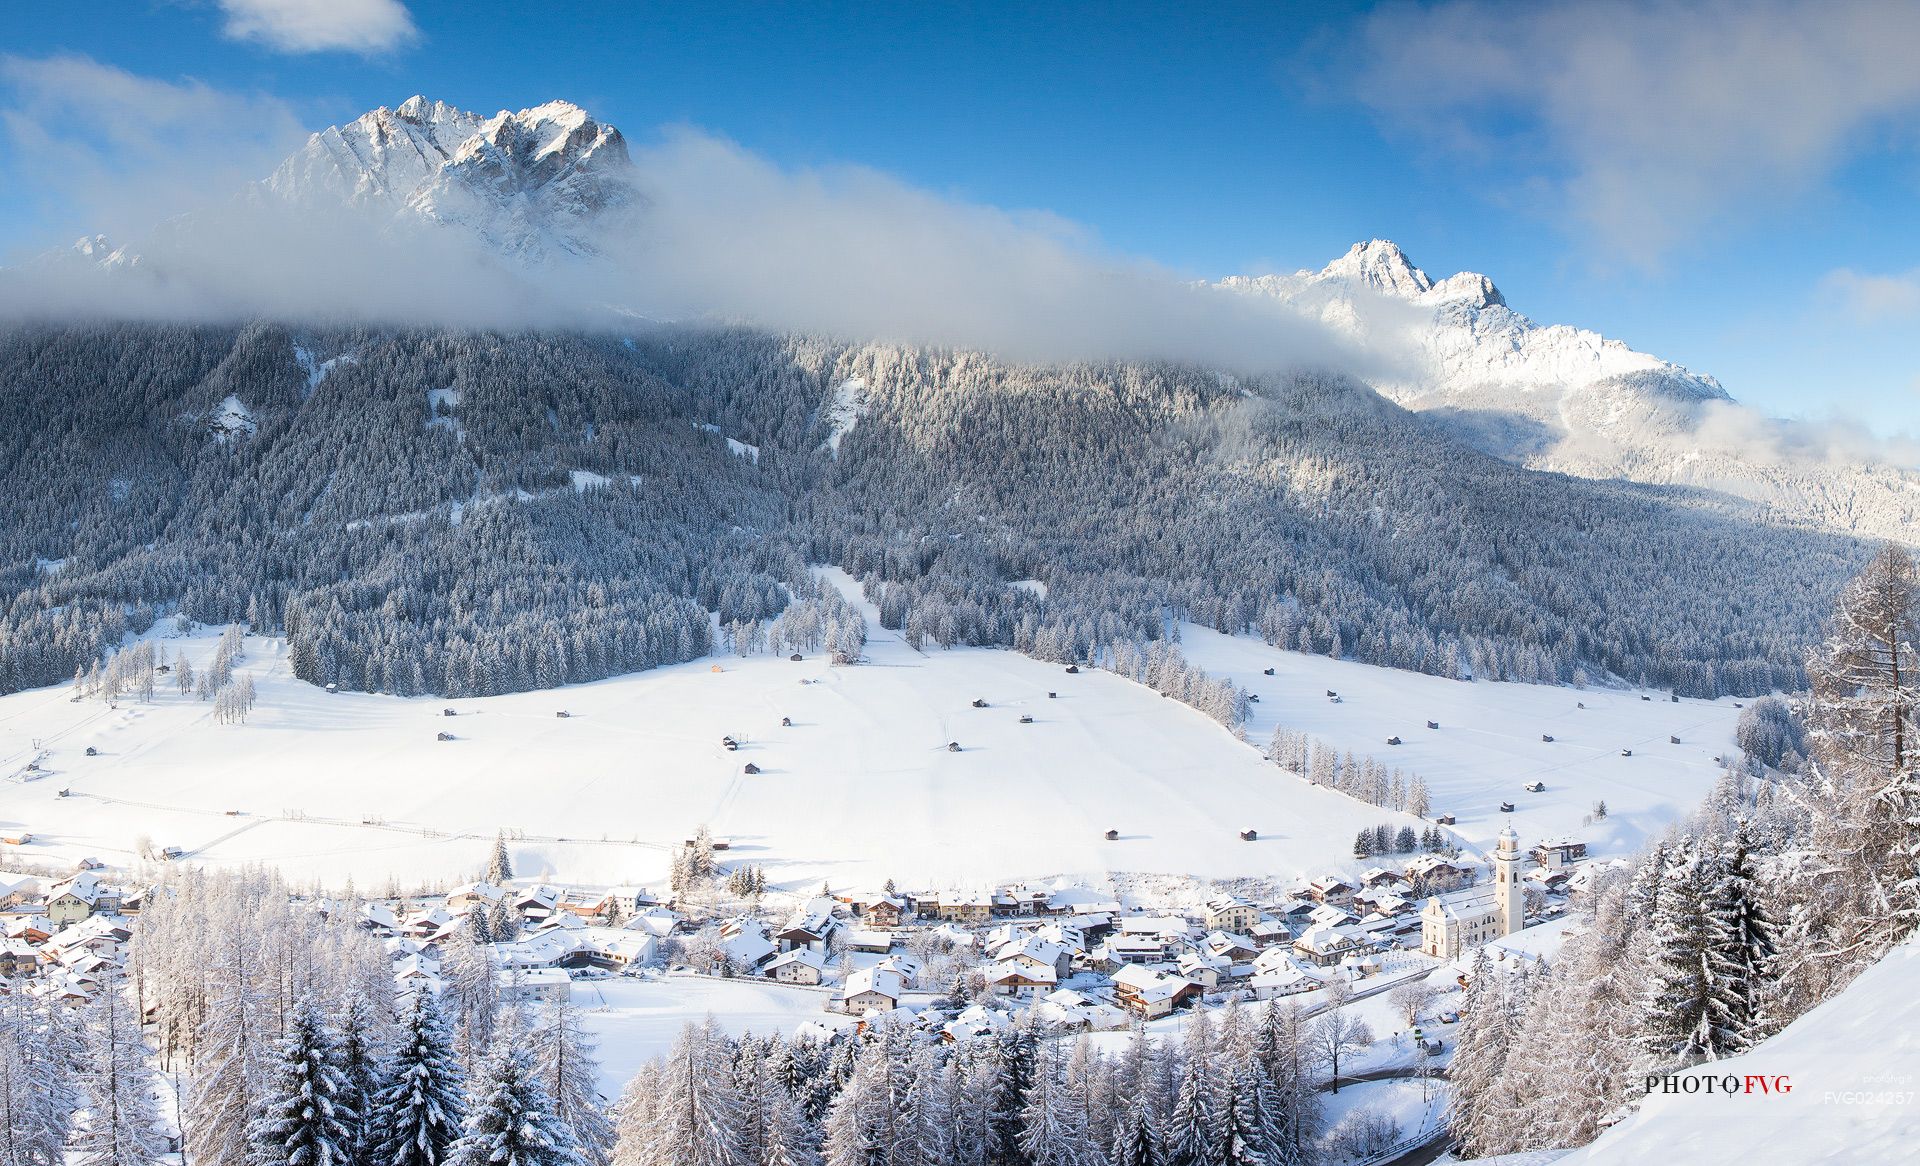 Sesto village and the Sesto dolomites in the background after a snowfall, Pusteria valley, Italy